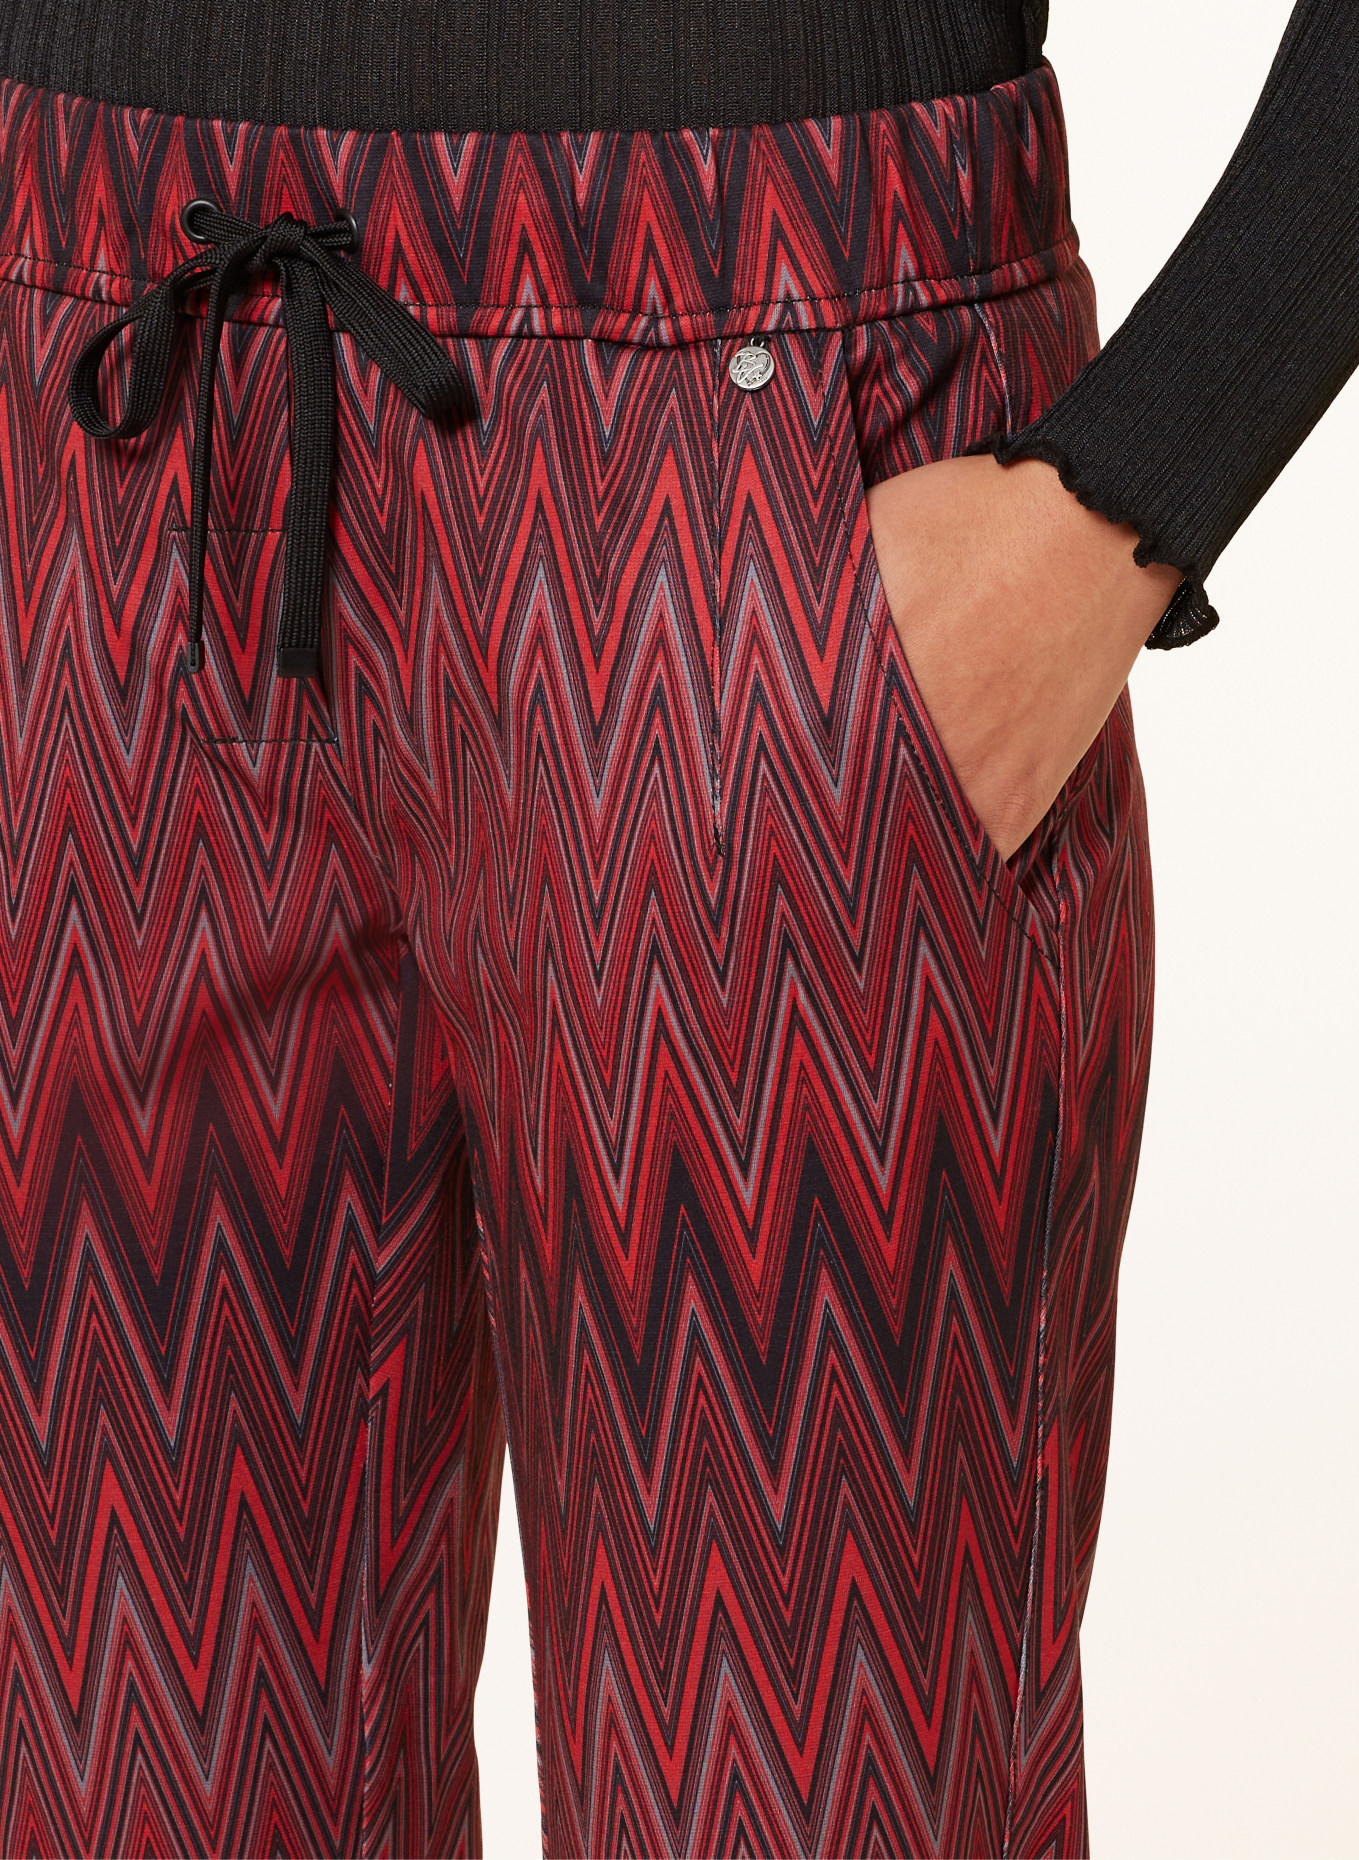 Buena Vista Pants in jogger style, Color: RED/ BLACK/ GRAY (Image 5)